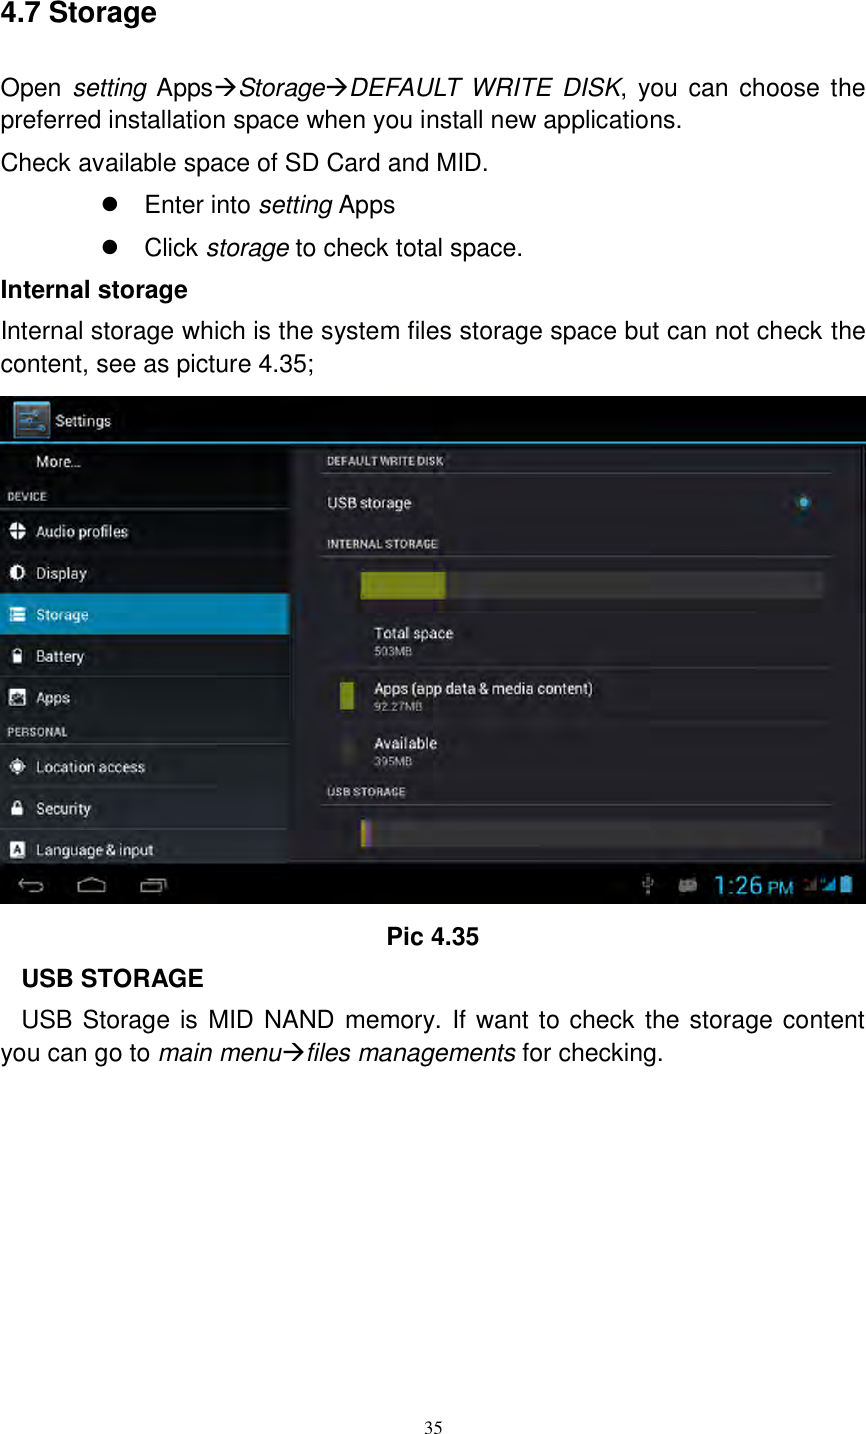      35  4.7 Storage Open setting AppsStorageDEFAULT WRITE  DISK, you can  choose  the preferred installation space when you install new applications. Check available space of SD Card and MID.     Enter into setting Apps   Click storage to check total space. Internal storage Internal storage which is the system files storage space but can not check the content, see as picture 4.35;  Pic 4.35 USB STORAGE USB Storage is MID NAND memory. If want to check the storage content you can go to main menufiles managements for checking.  